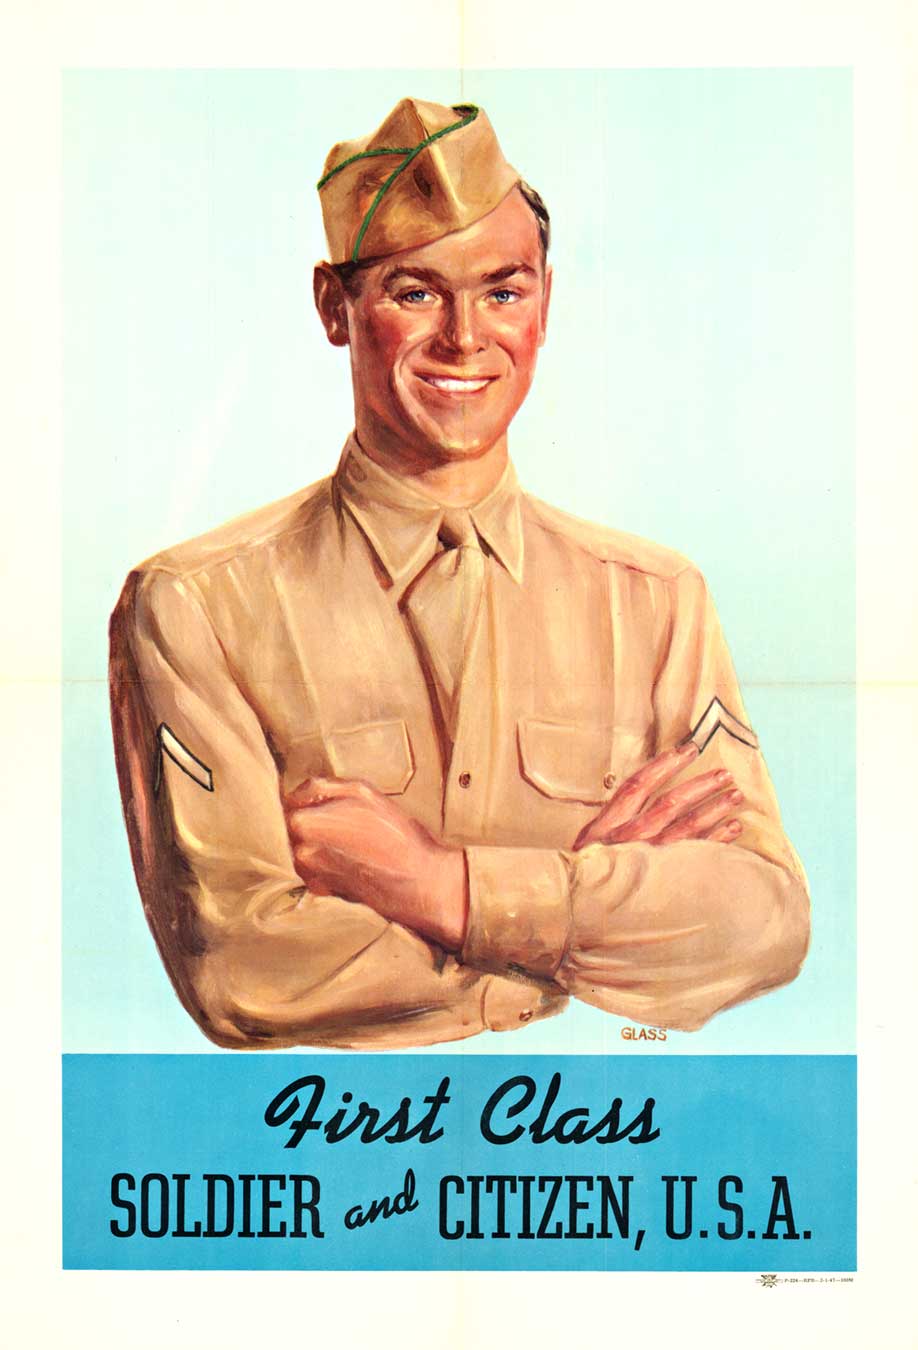 soldier in brown uniform, military poster 1947 A military recruitment poster for young men to join the military post World War 2. The poster features a clean-cut, handsome man in his military uniform with crossed arms smiling at you. Artist: Glass